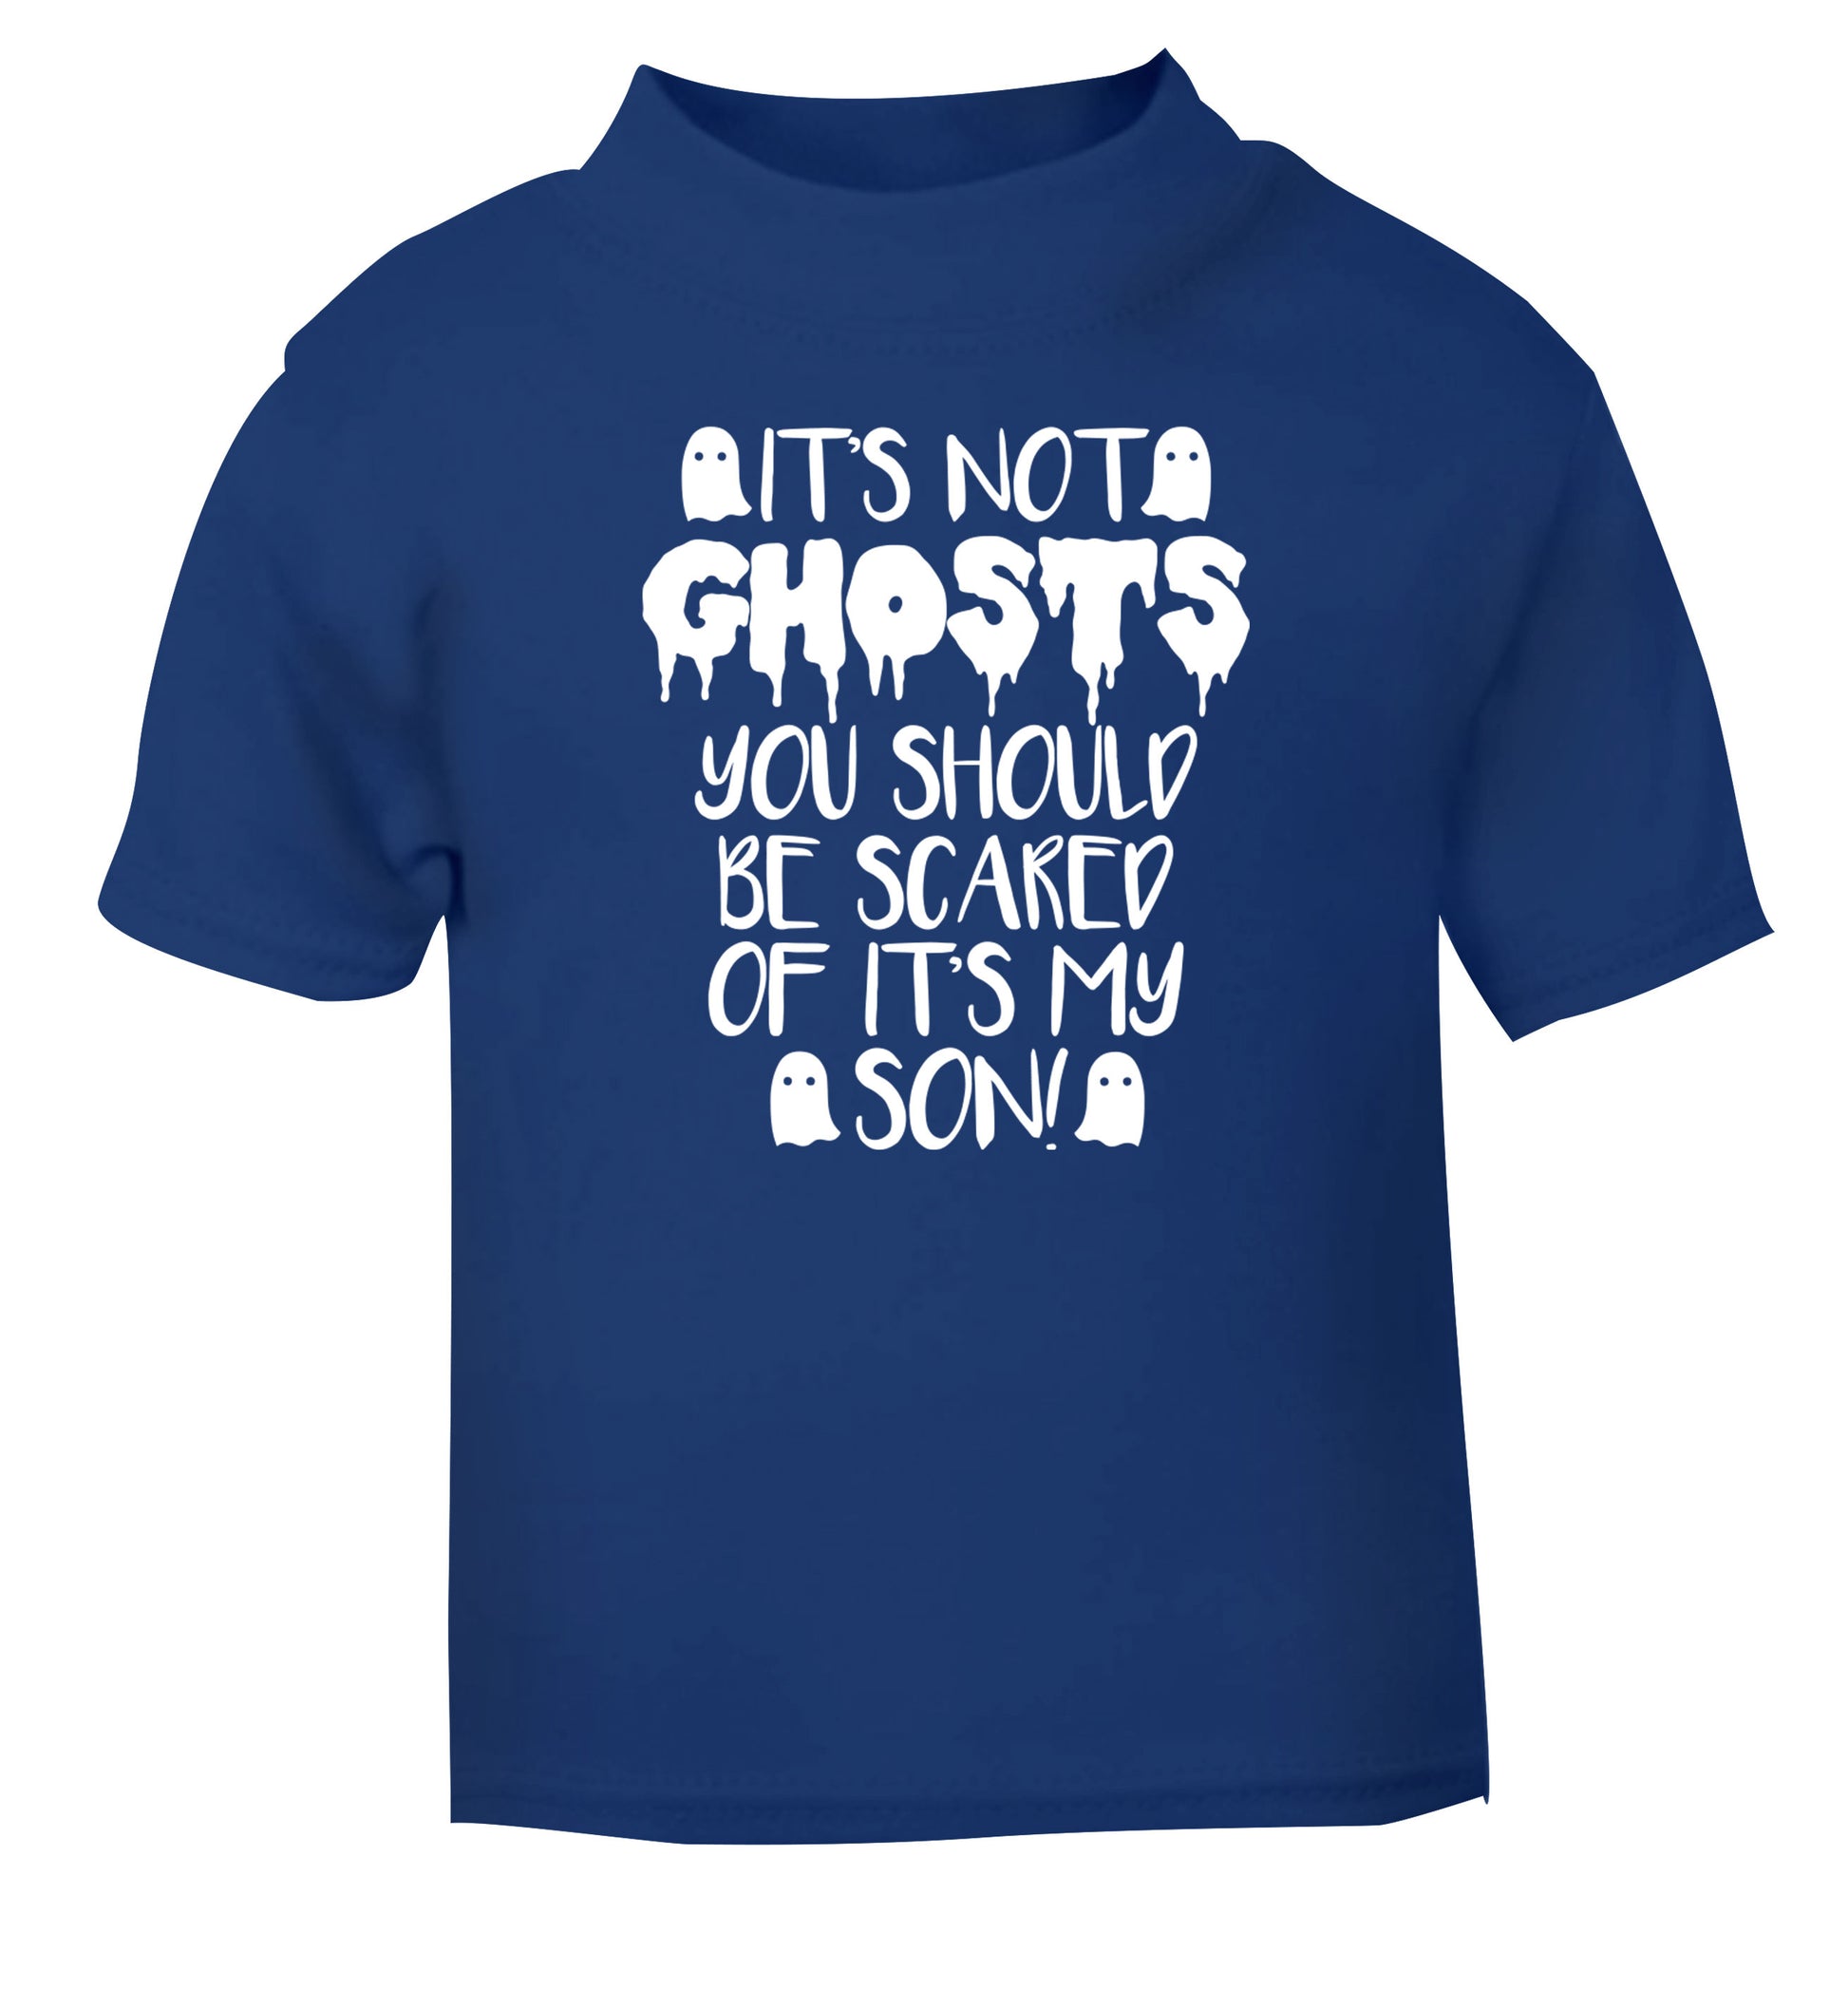 It's not ghosts you should be scared of it's my son! blue Baby Toddler Tshirt 2 Years